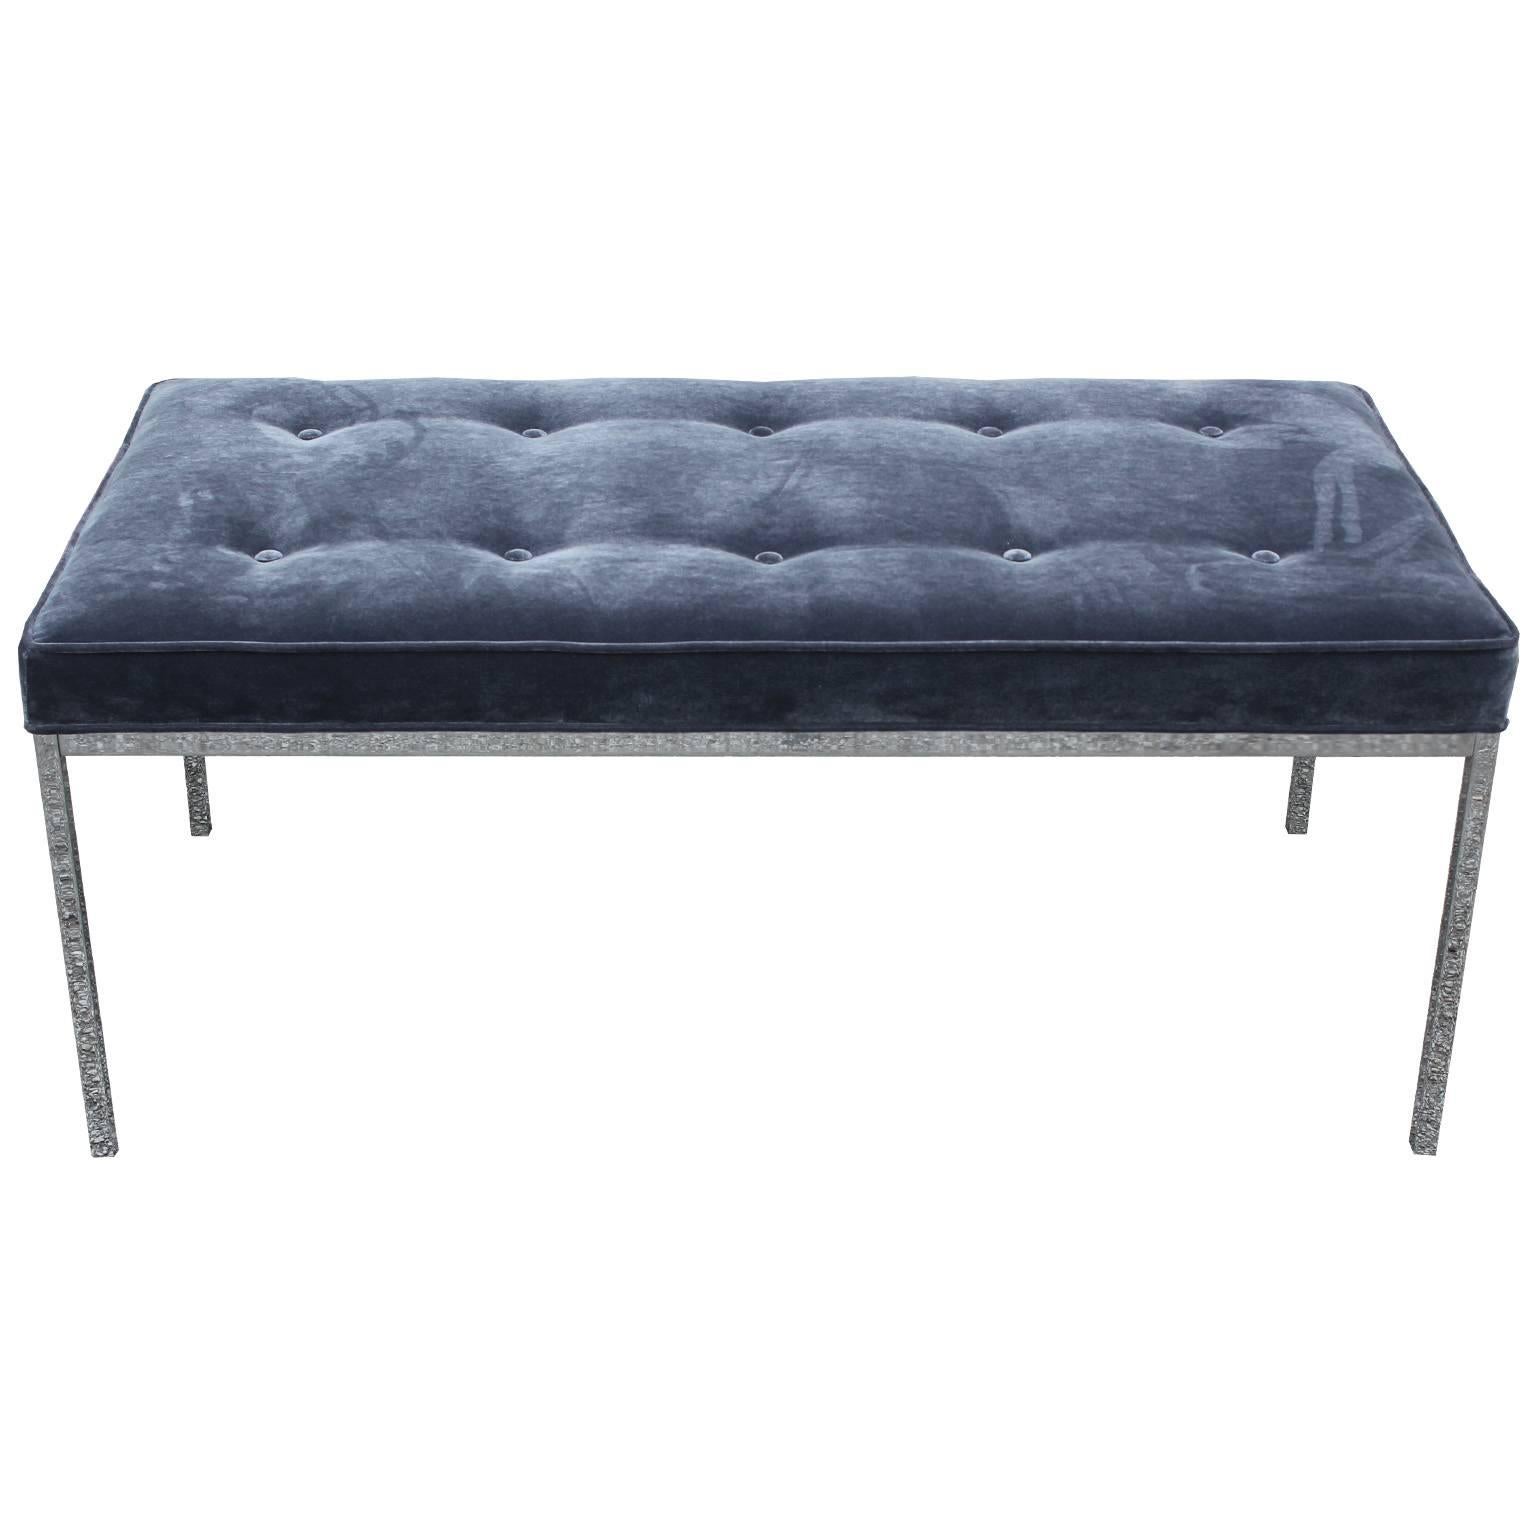 Elegant Florence Knoll modern bench freshly upholstered in a luxe grey velvet. A clean lined chrome base finishes the piece. 